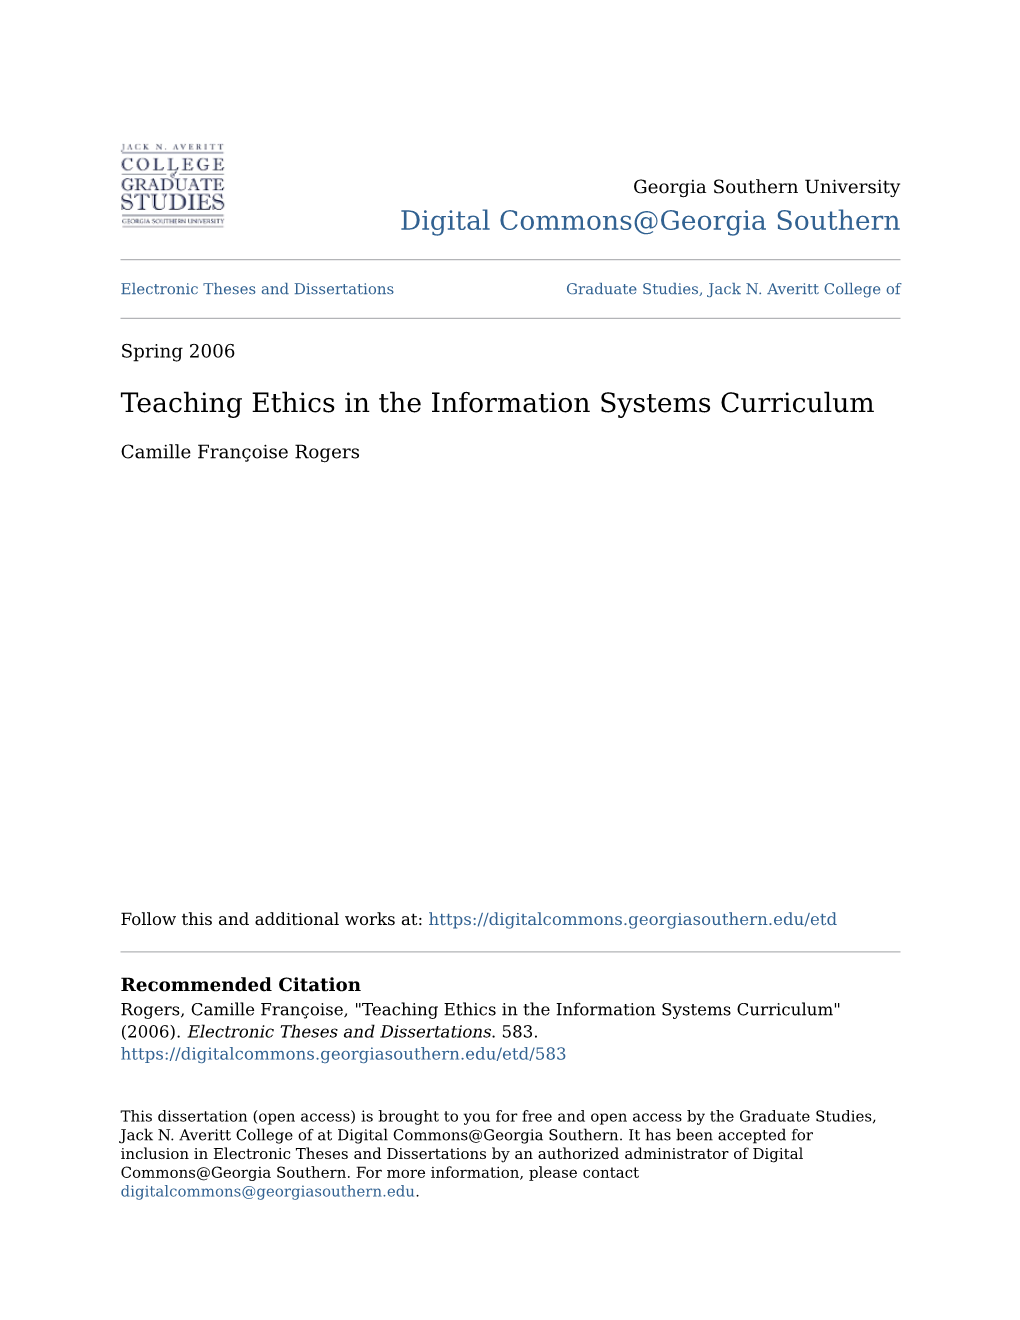 Teaching Ethics in the Information Systems Curriculum